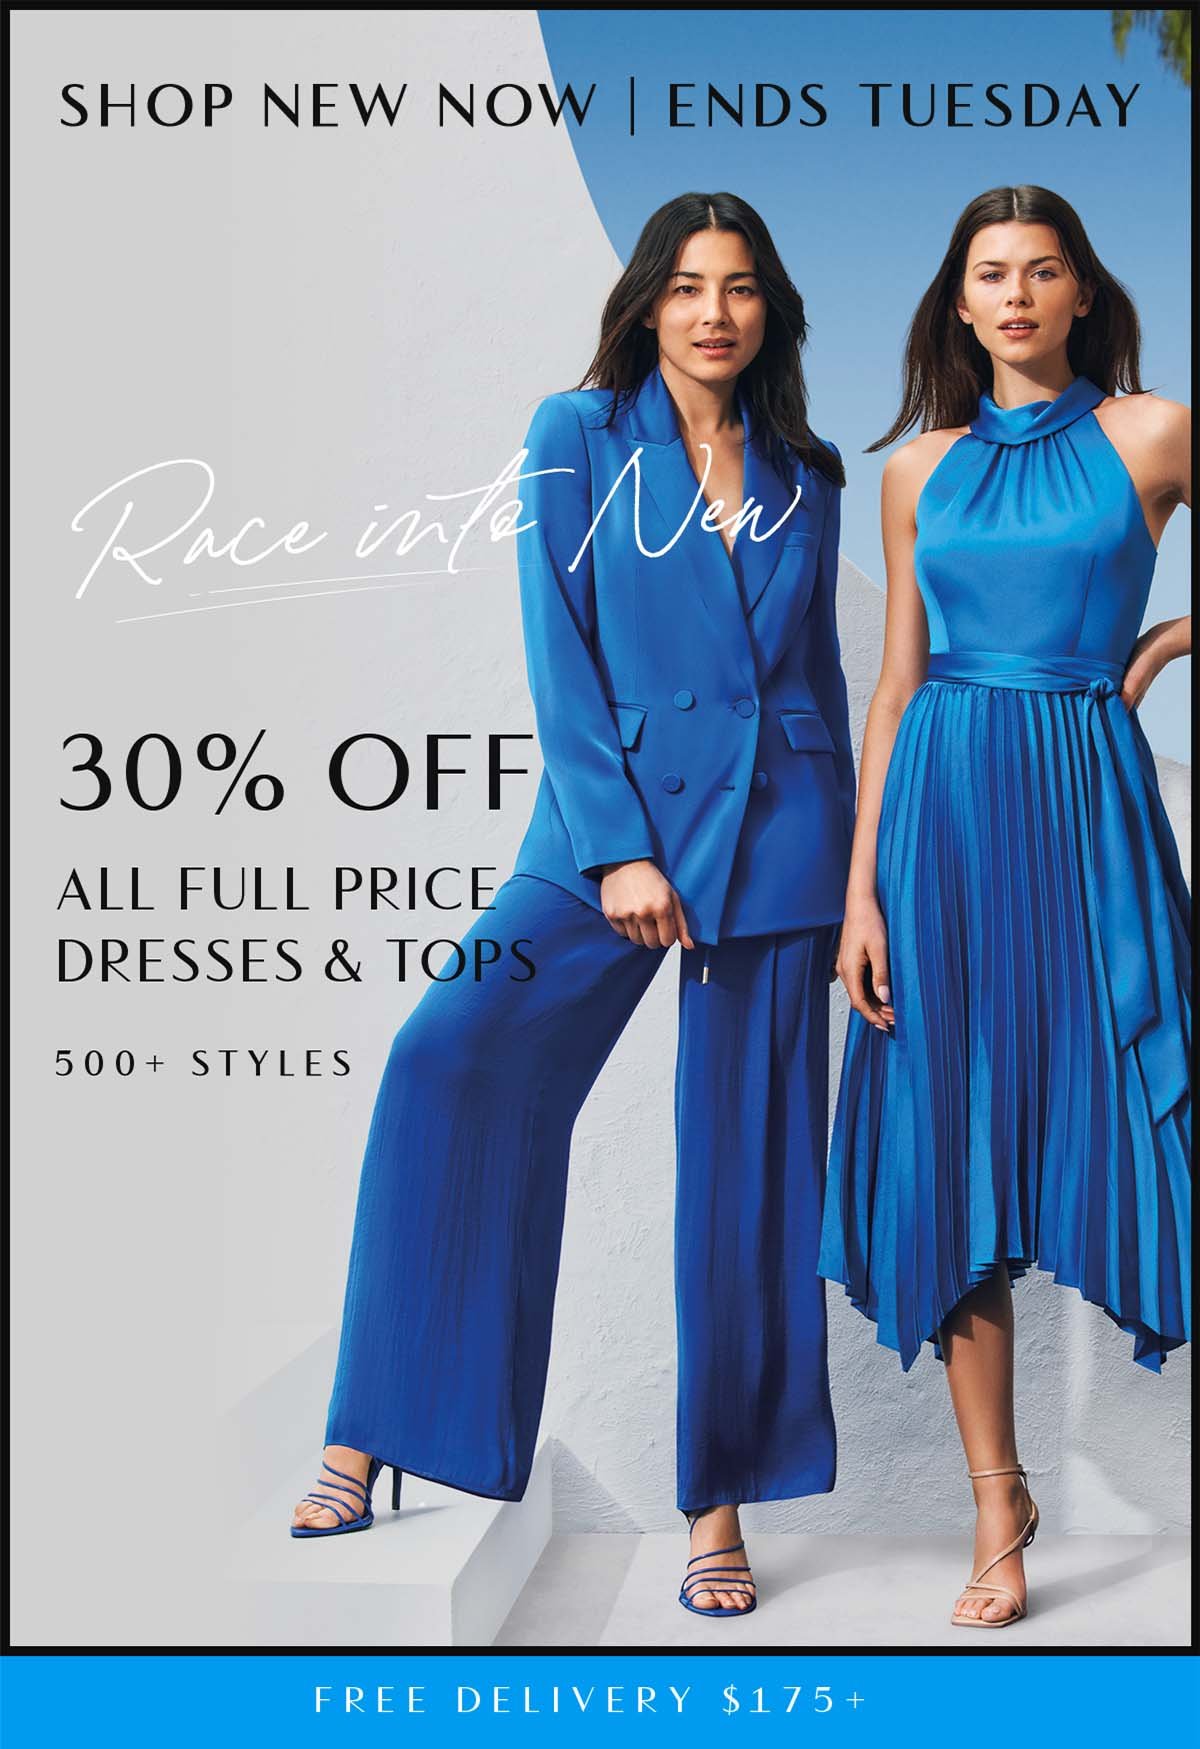 Race Into New. 30% Off All Full Price Dresses & Tops 